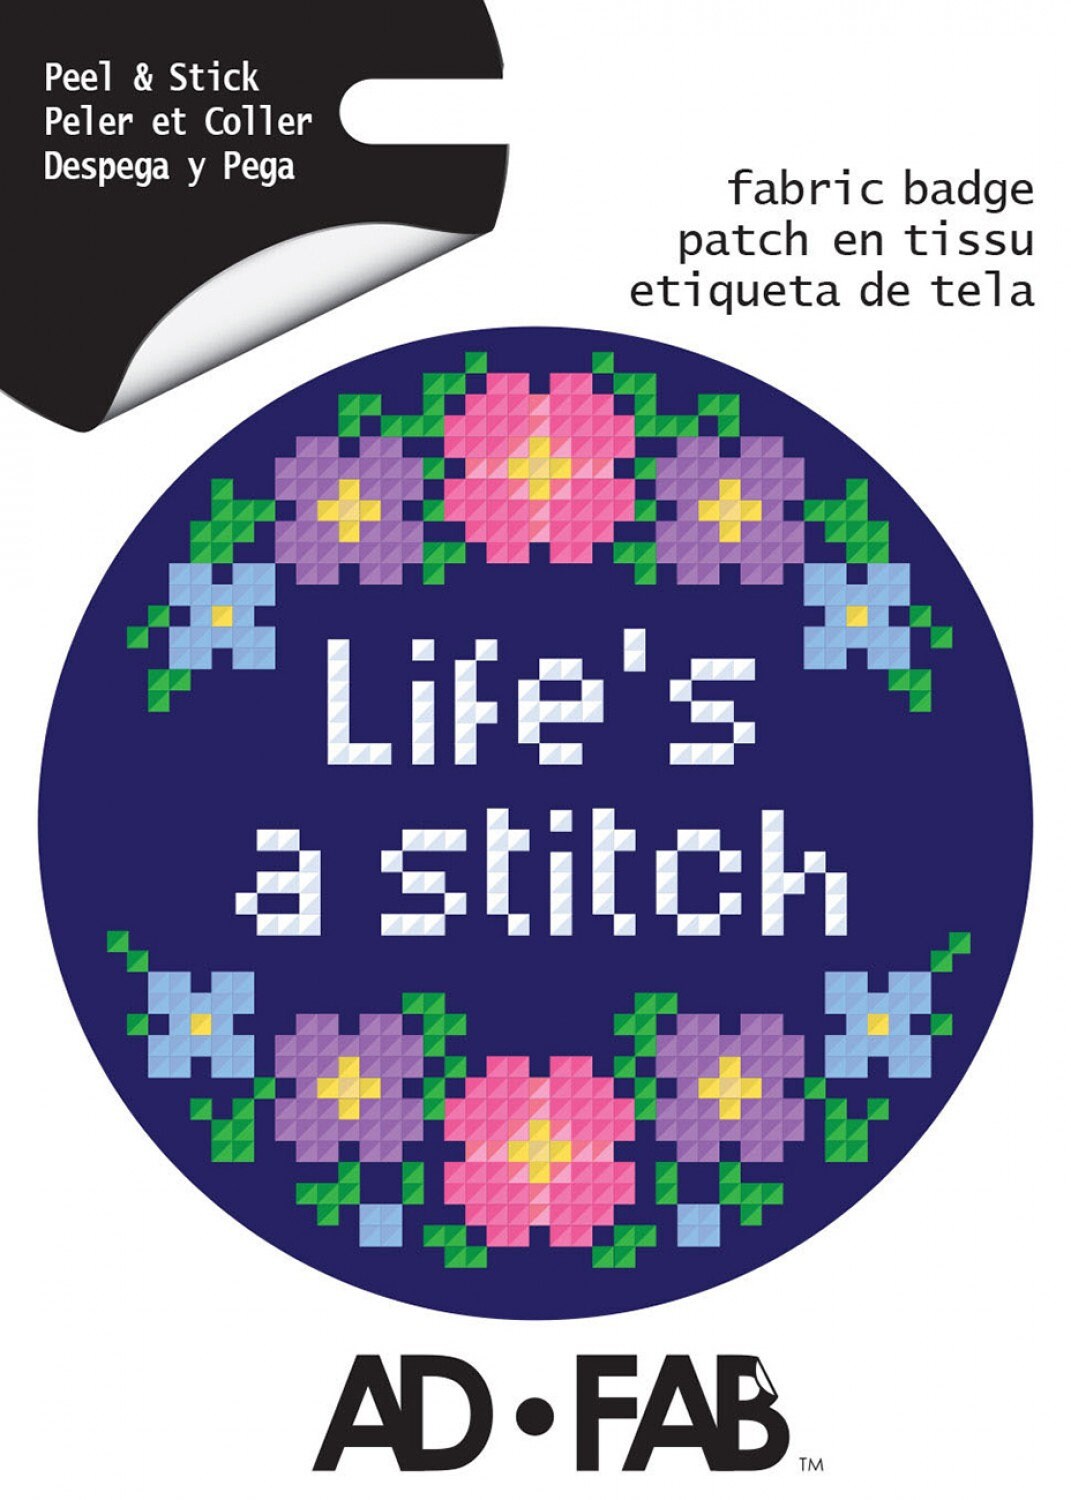 Ad Fab Adhesive Badge Sewer's Life Life's a Stitch Adhesive Fabric 3" Badge 21182501X 100% Polyester